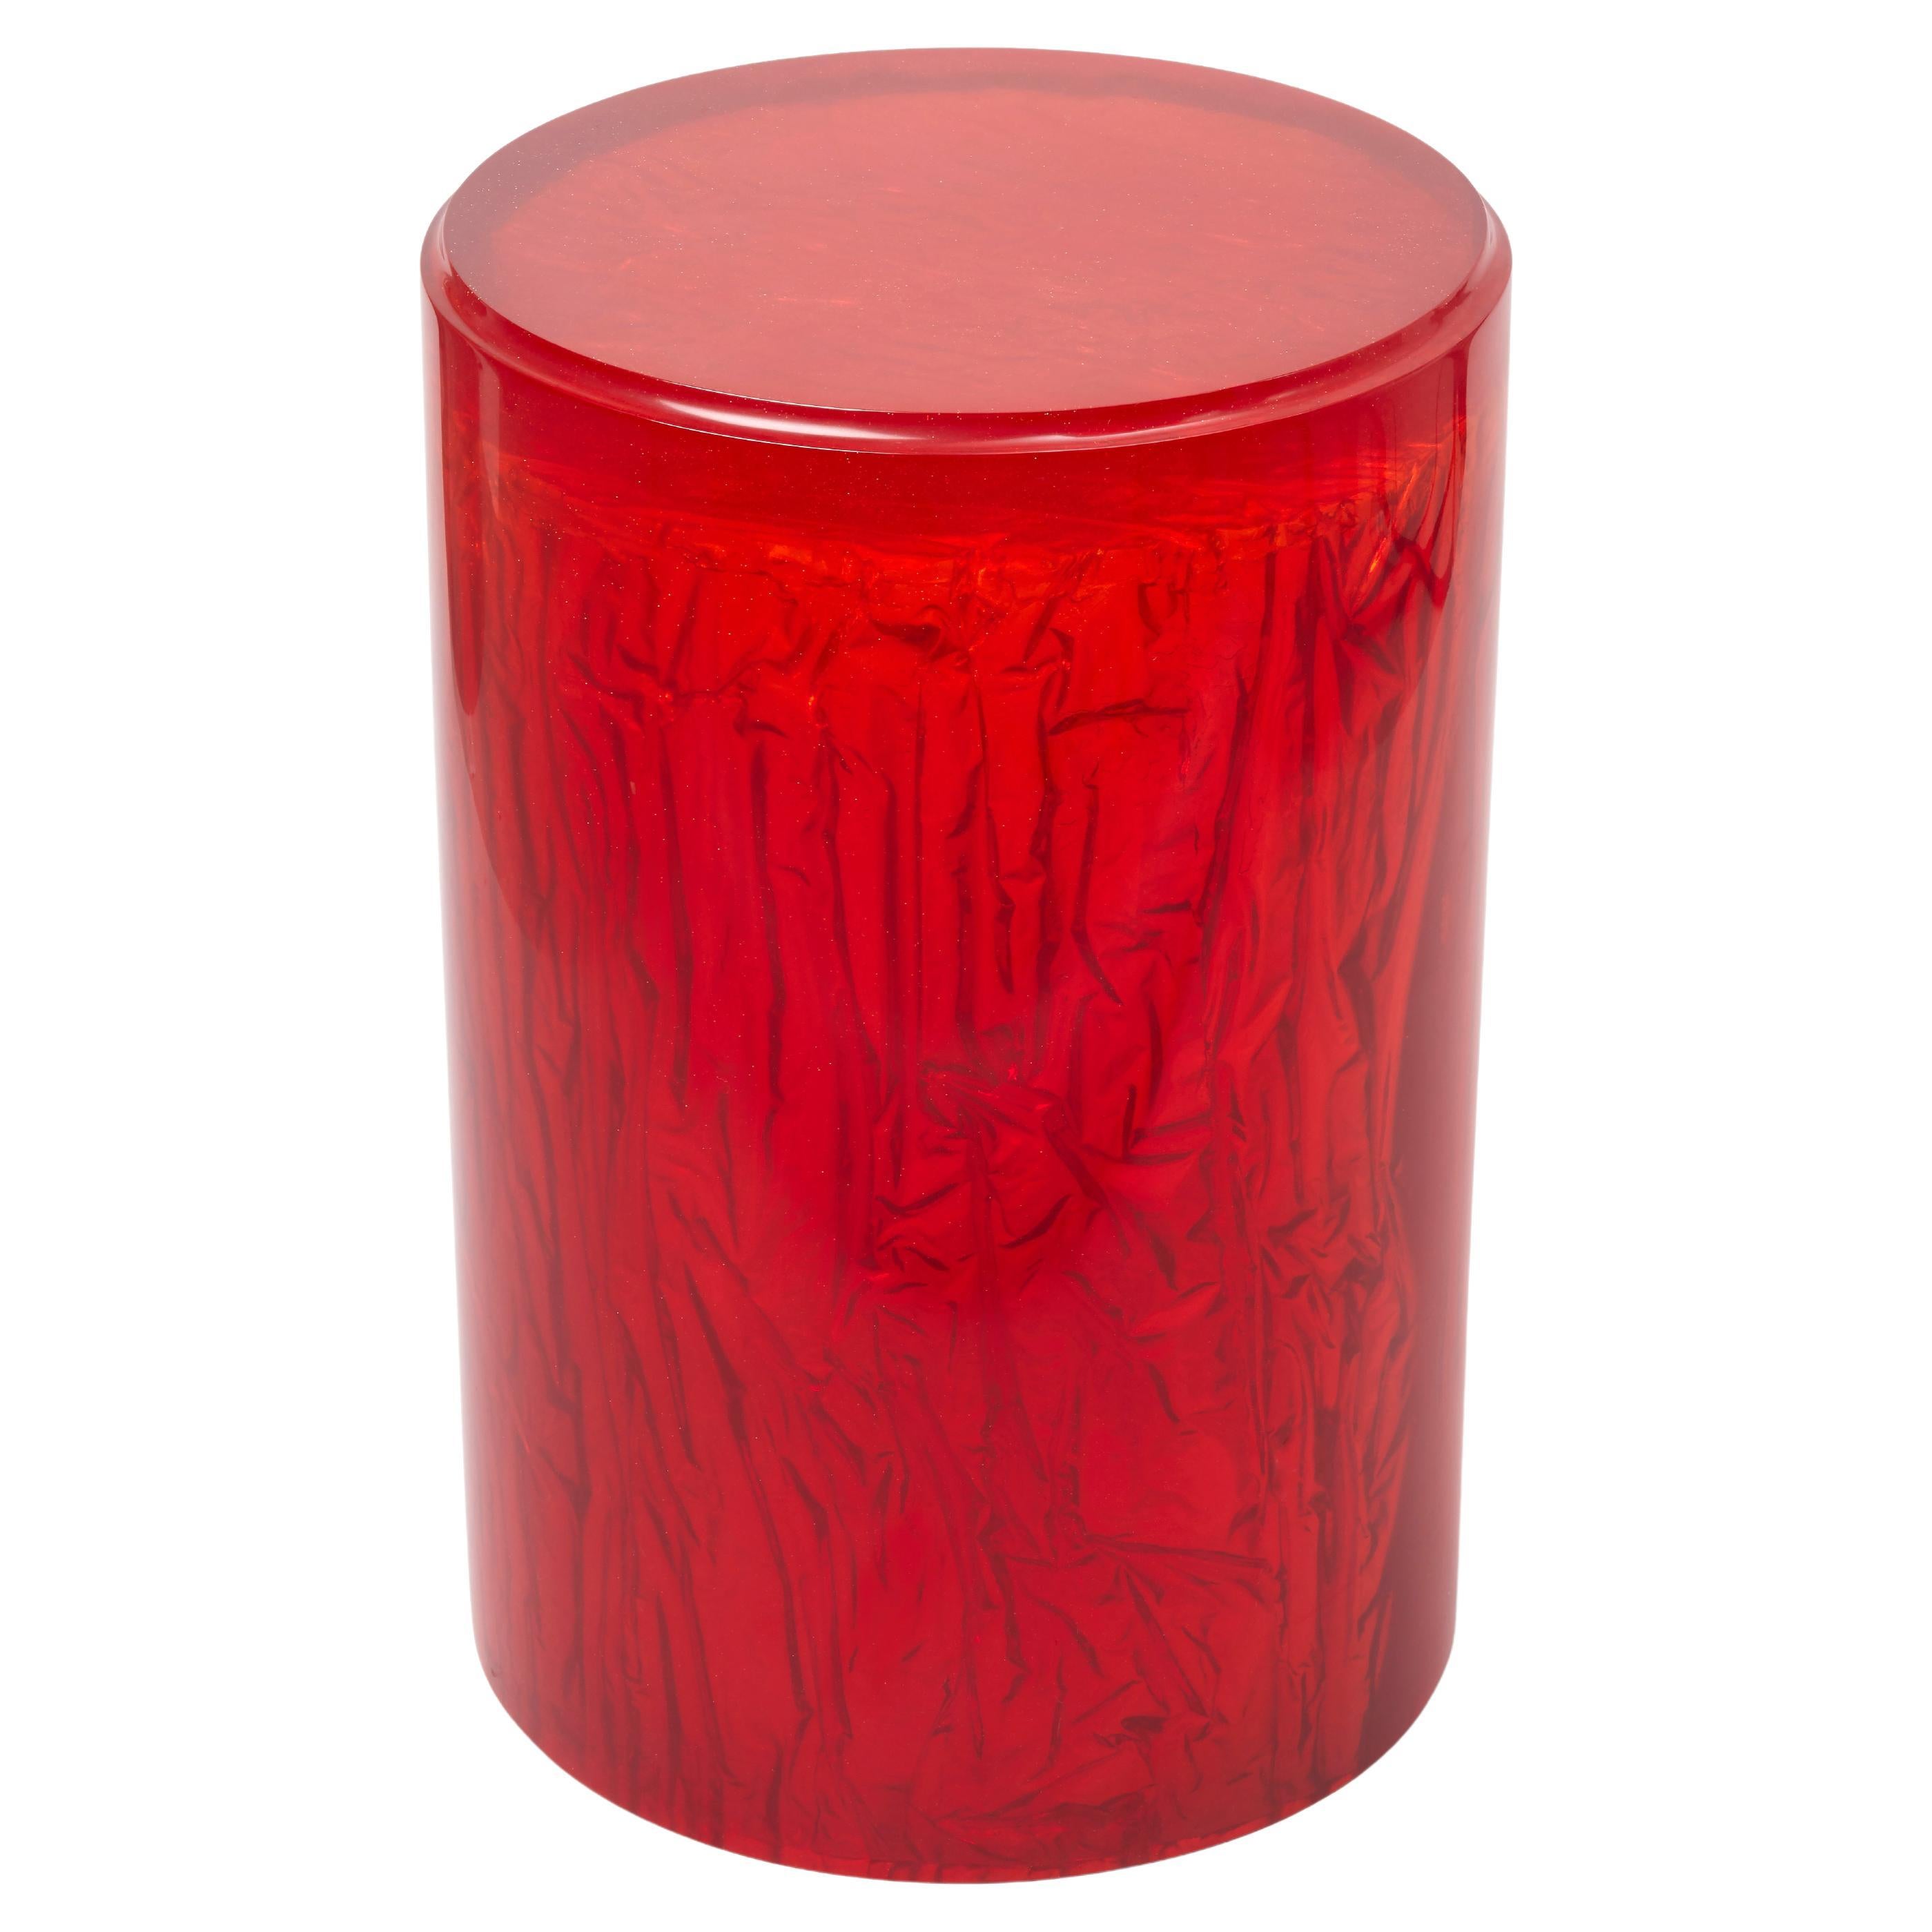 Contemporary Resin Acrylic Side Table or Stool by Natalie Tredgett, gloss, Red